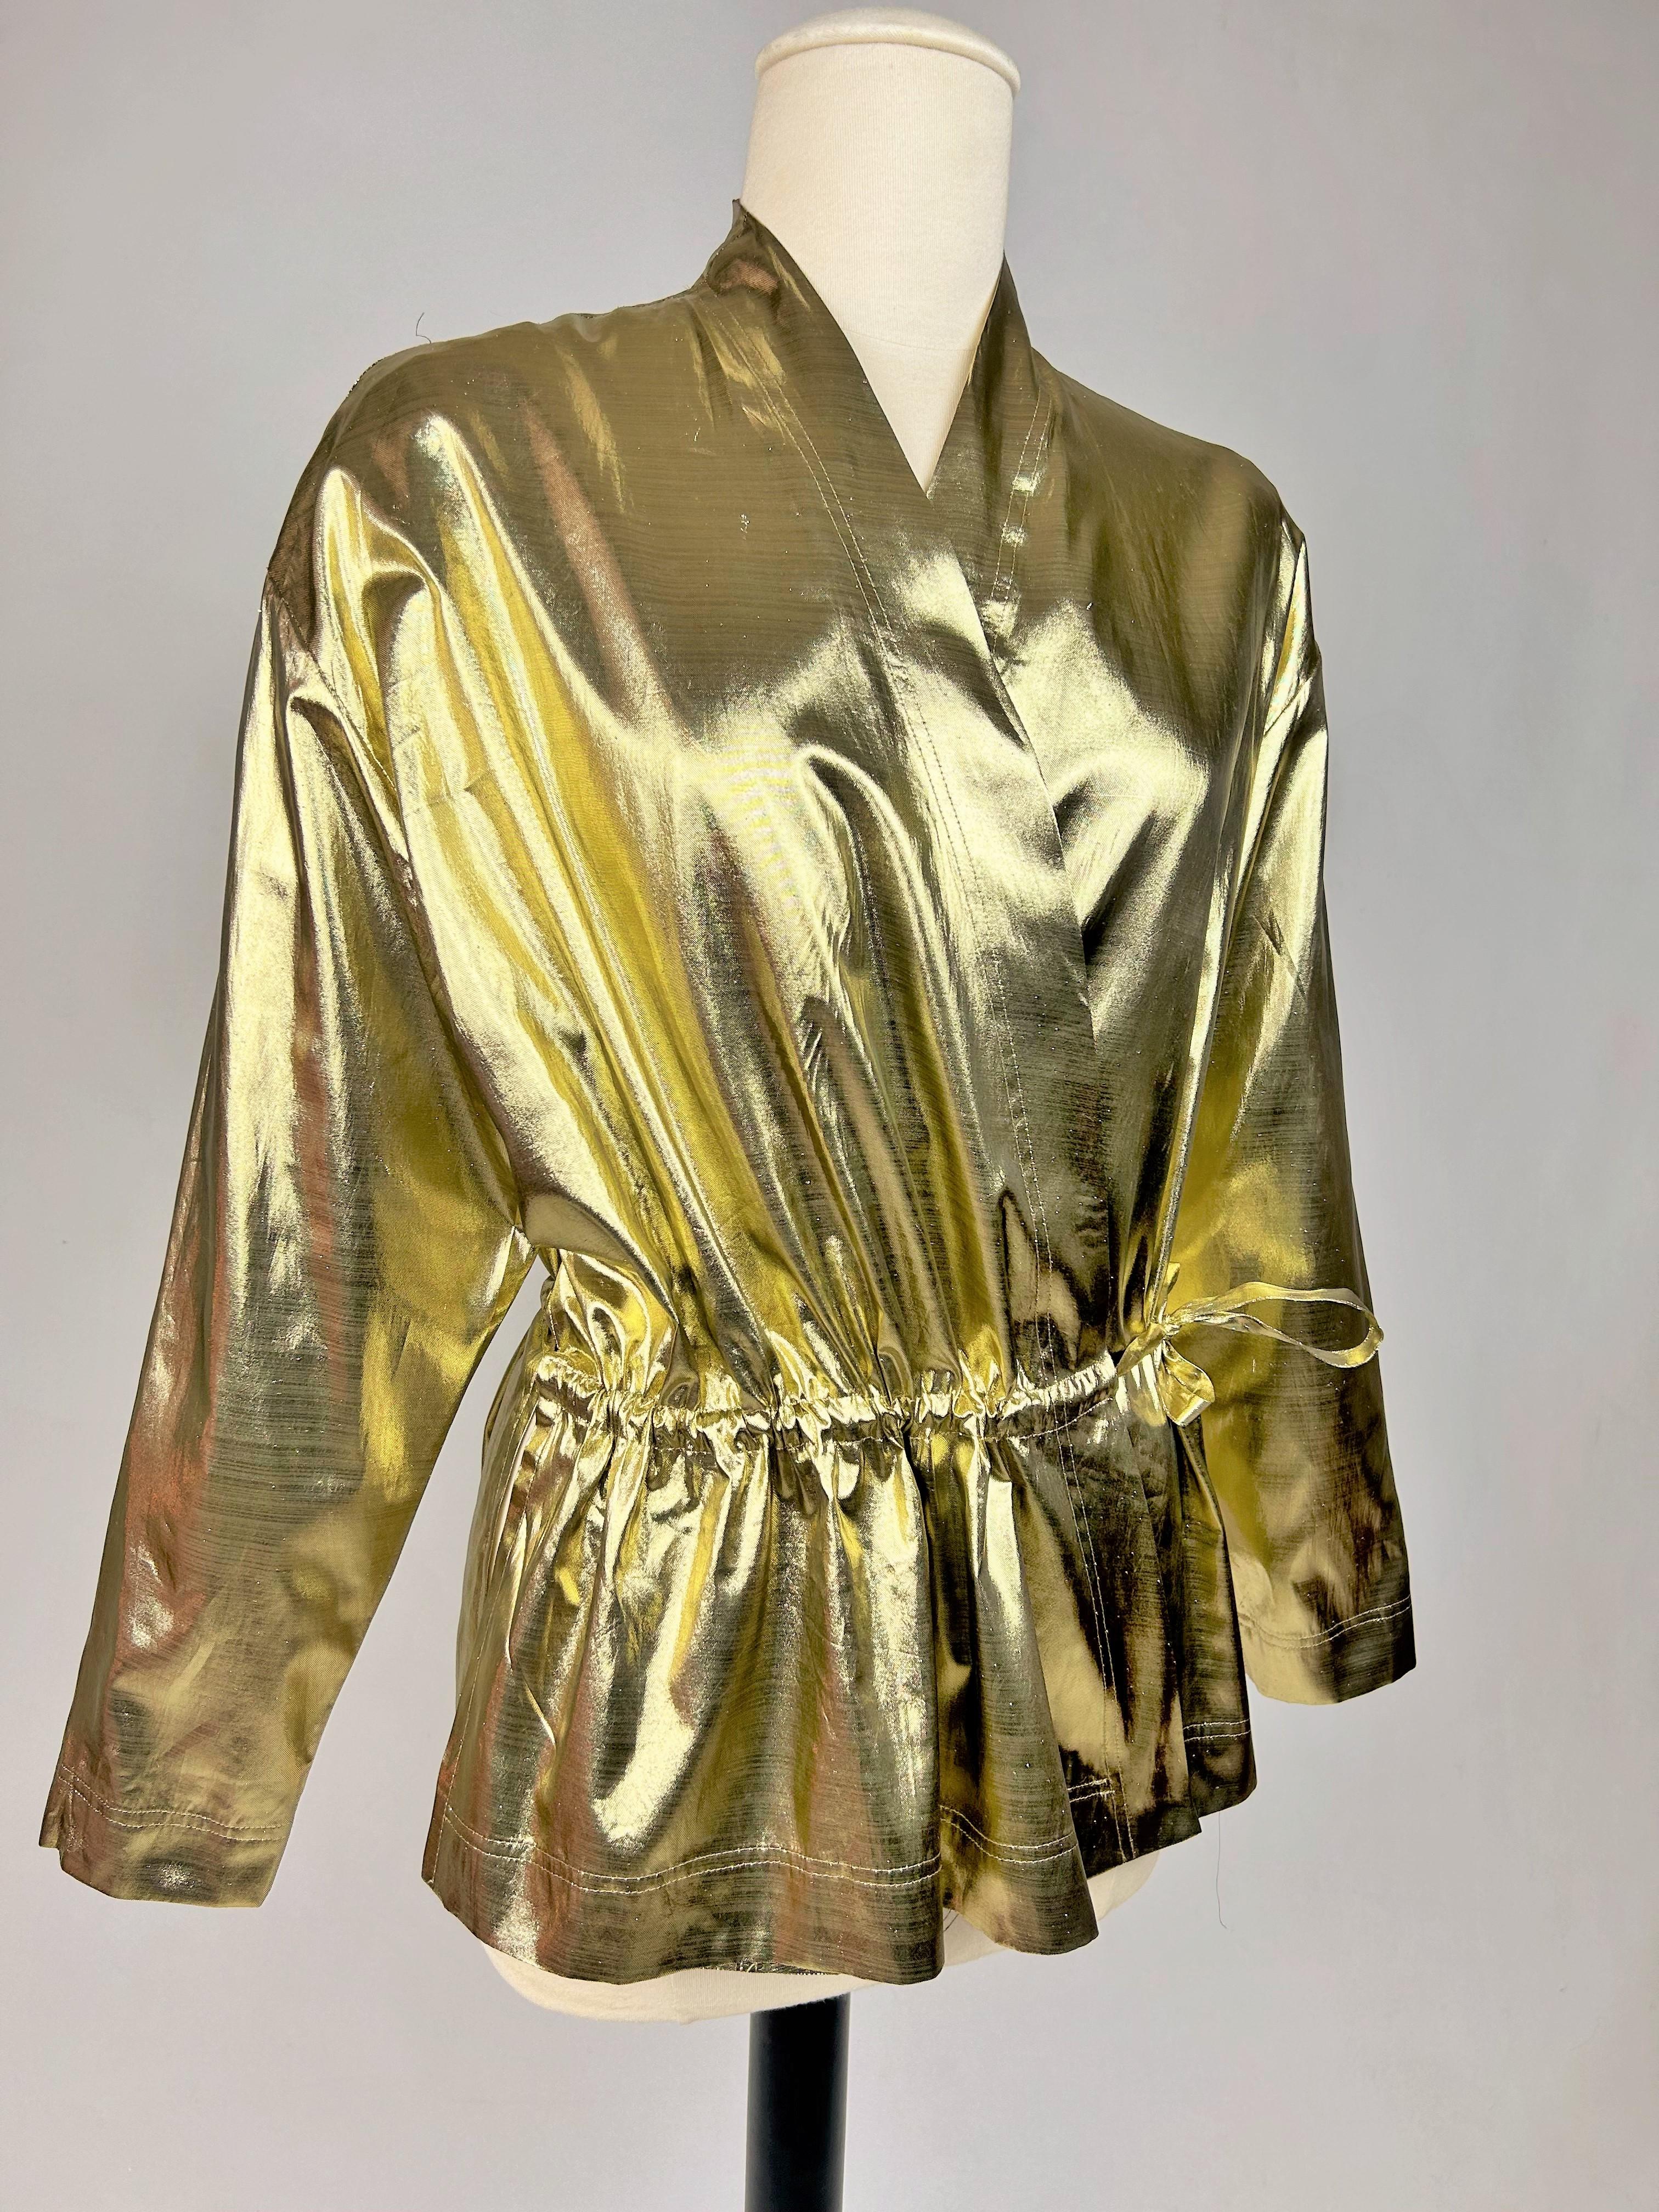 Circa 1990
France
Kimono blouse in very fine gold lamé by Yves Saint laurent Rive Gauche dating from the 1990s. Wide, flowing cut, slit on the sides and crossed at the front by a thin, matching sliding belt, allowing it to be tied at the waist. No